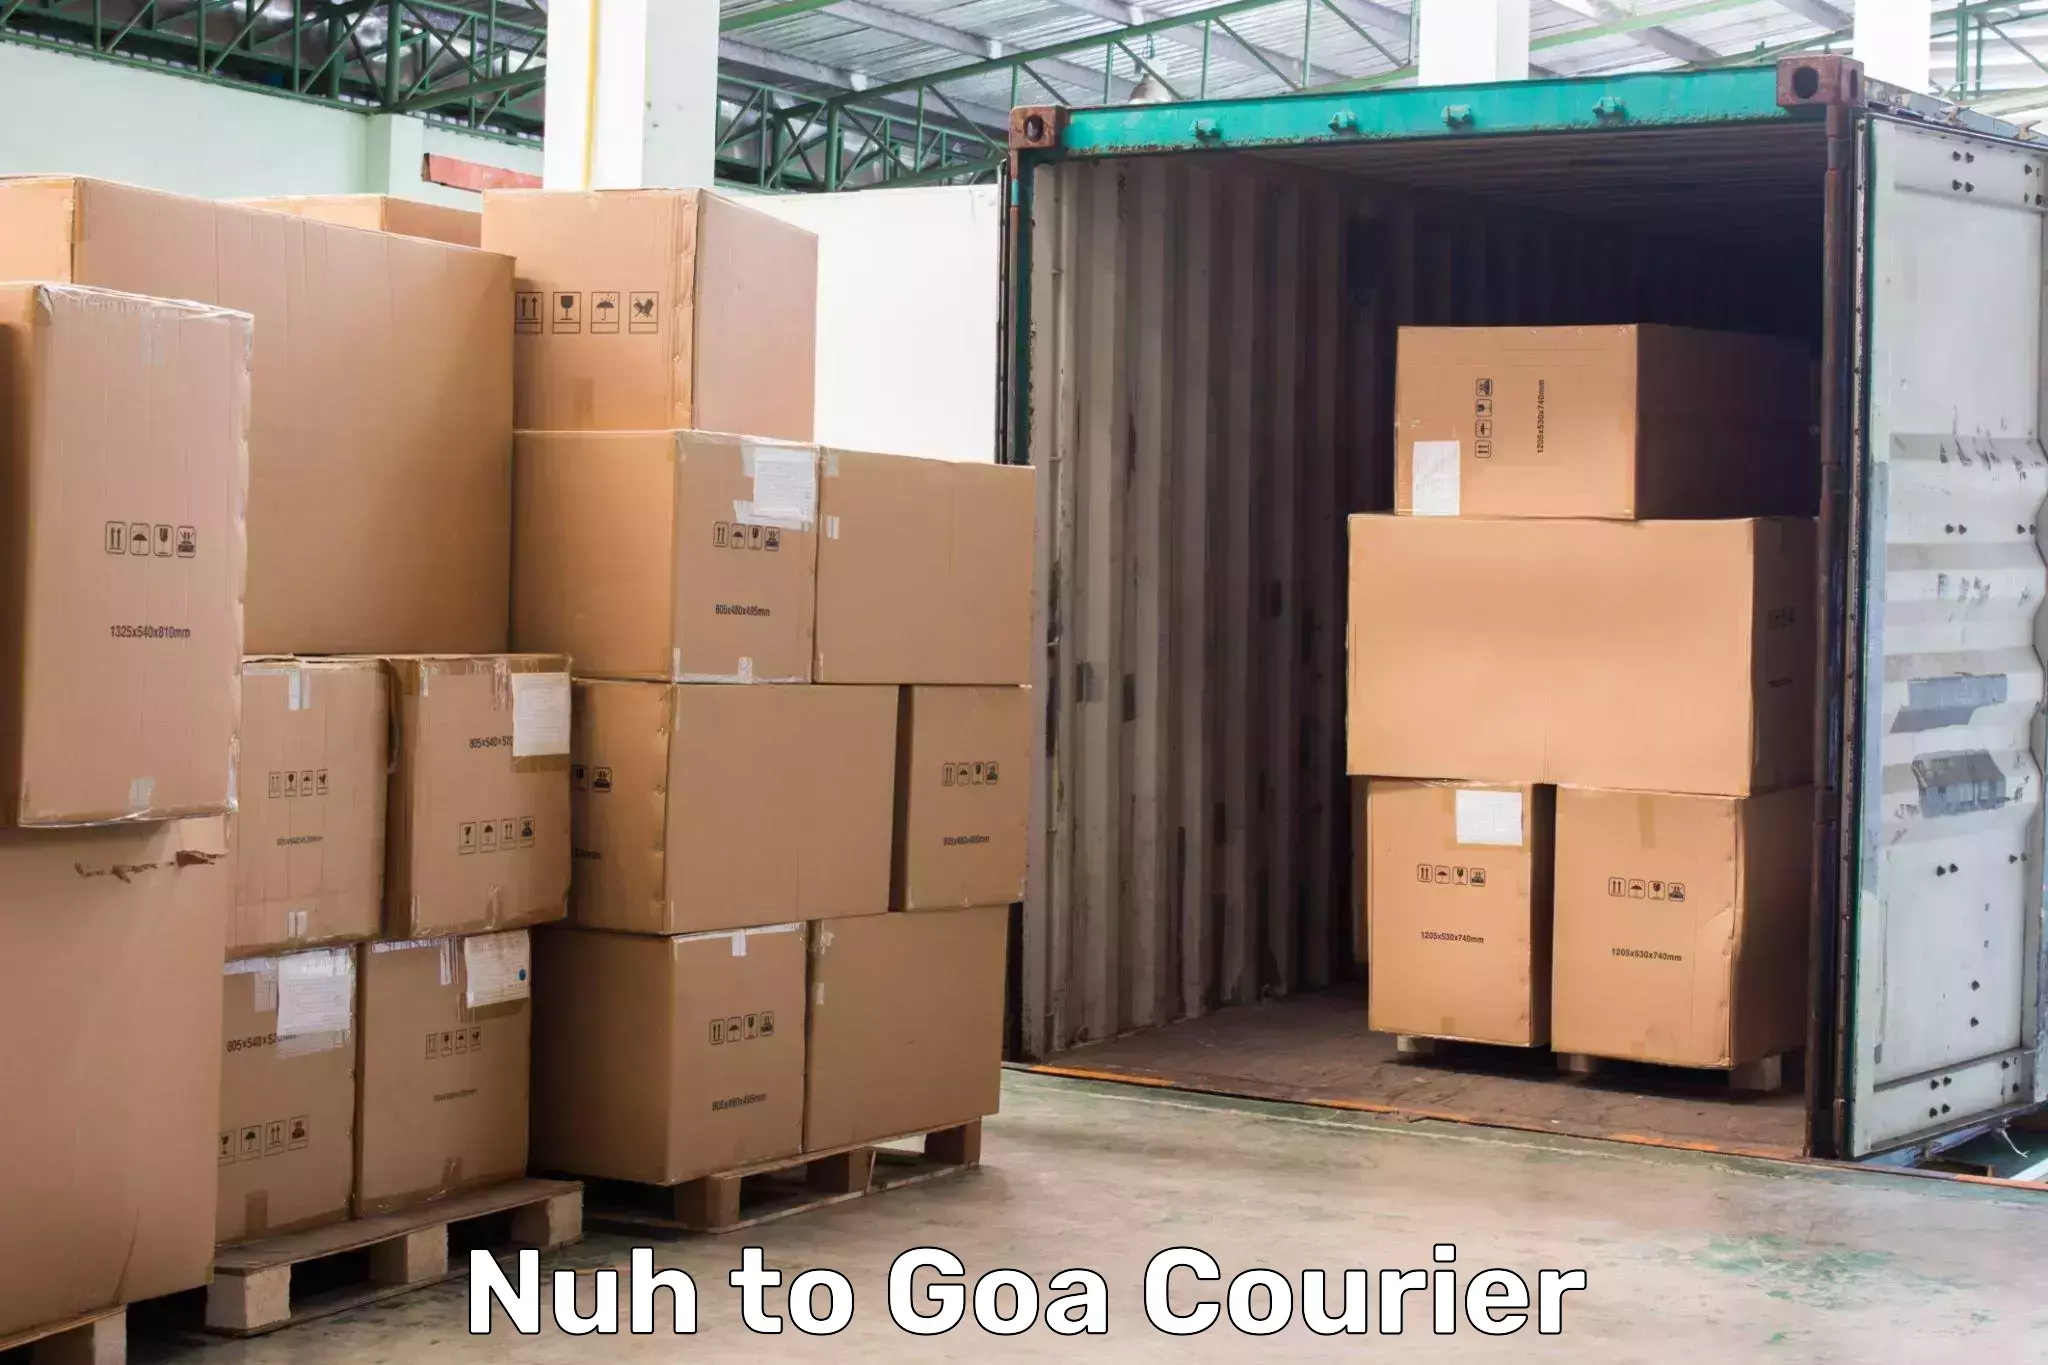 High-speed parcel service Nuh to Goa